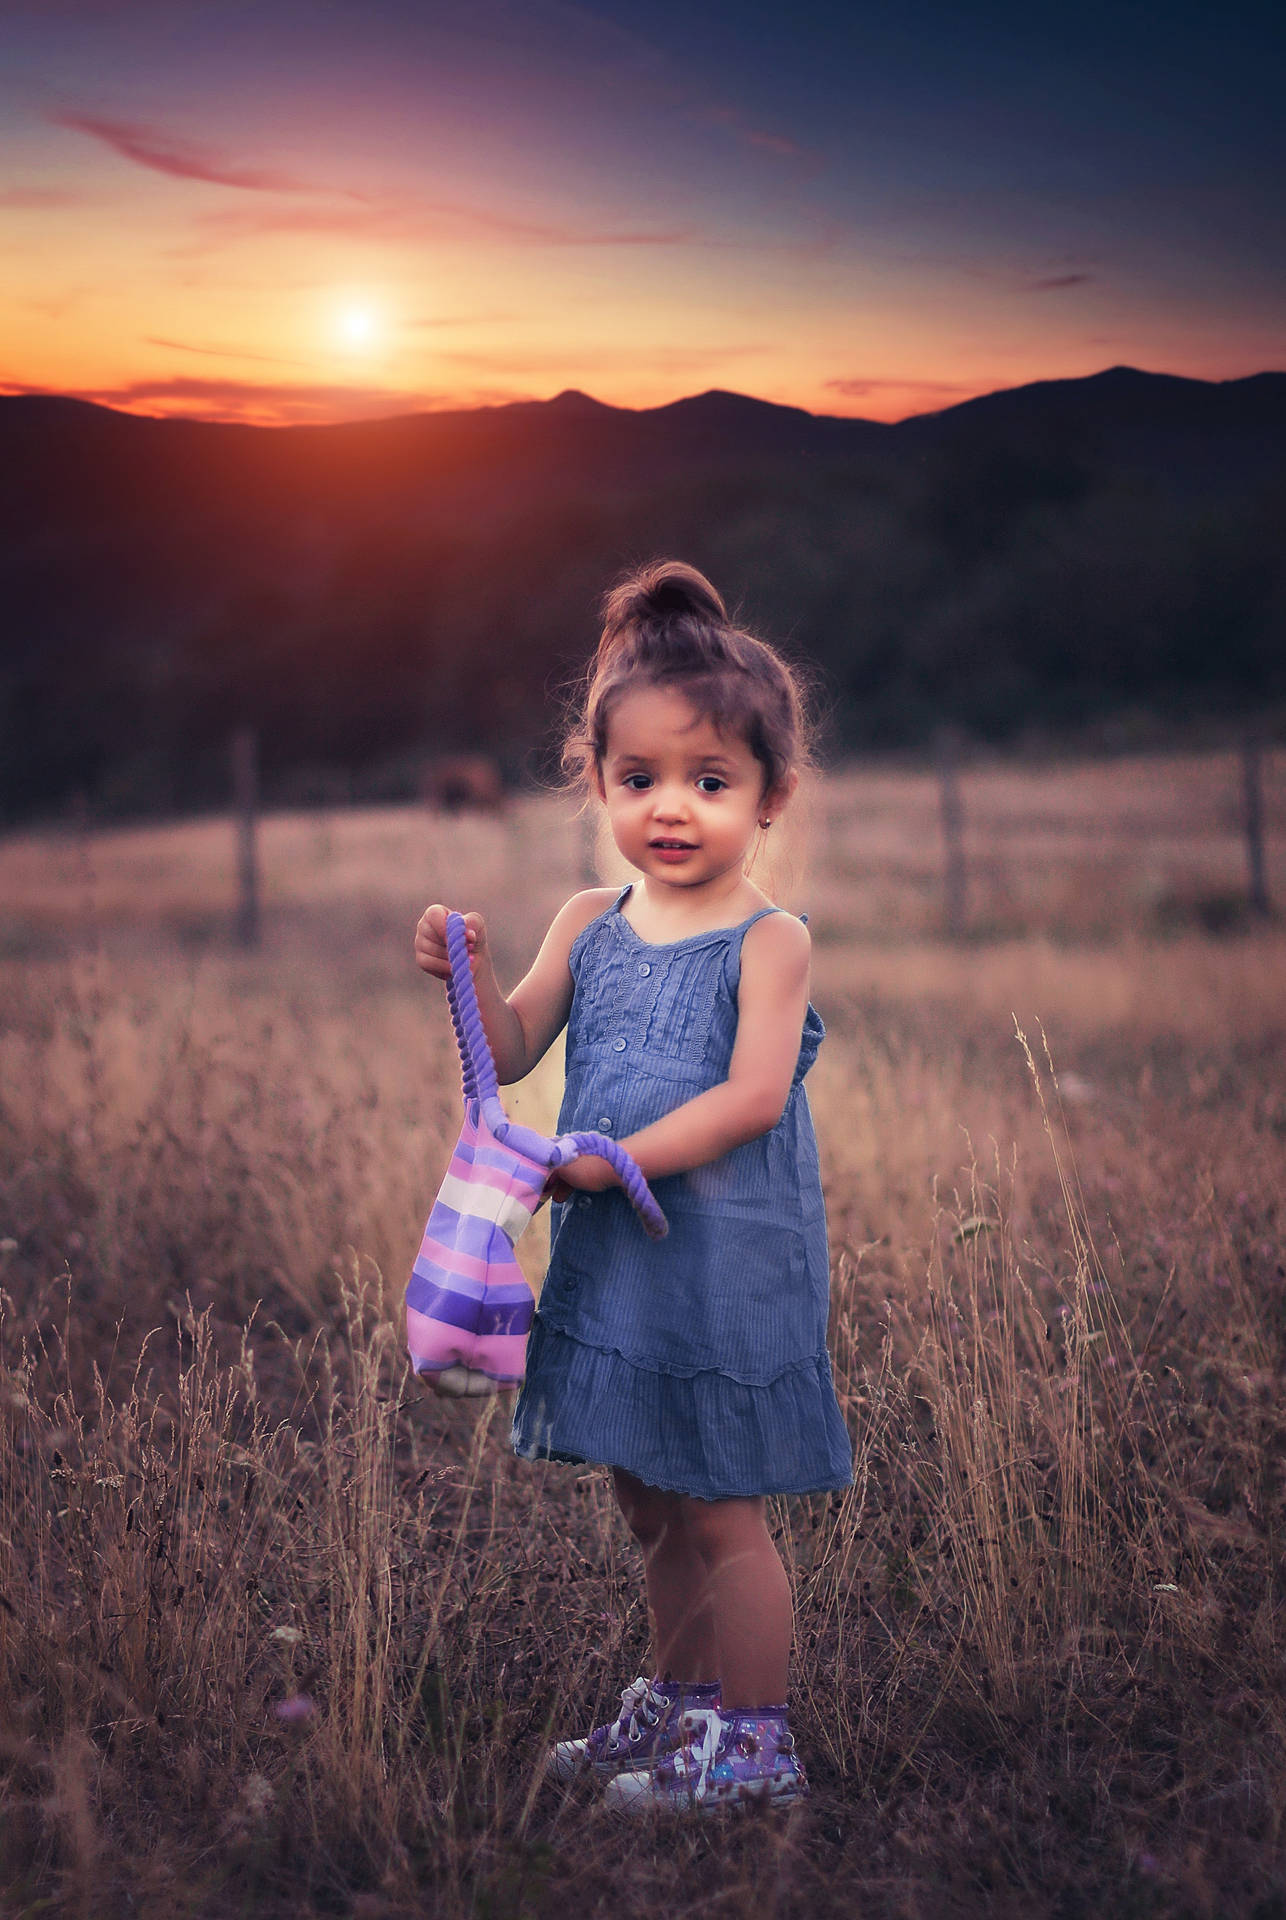 Cute Girl With Bag In Grass Field